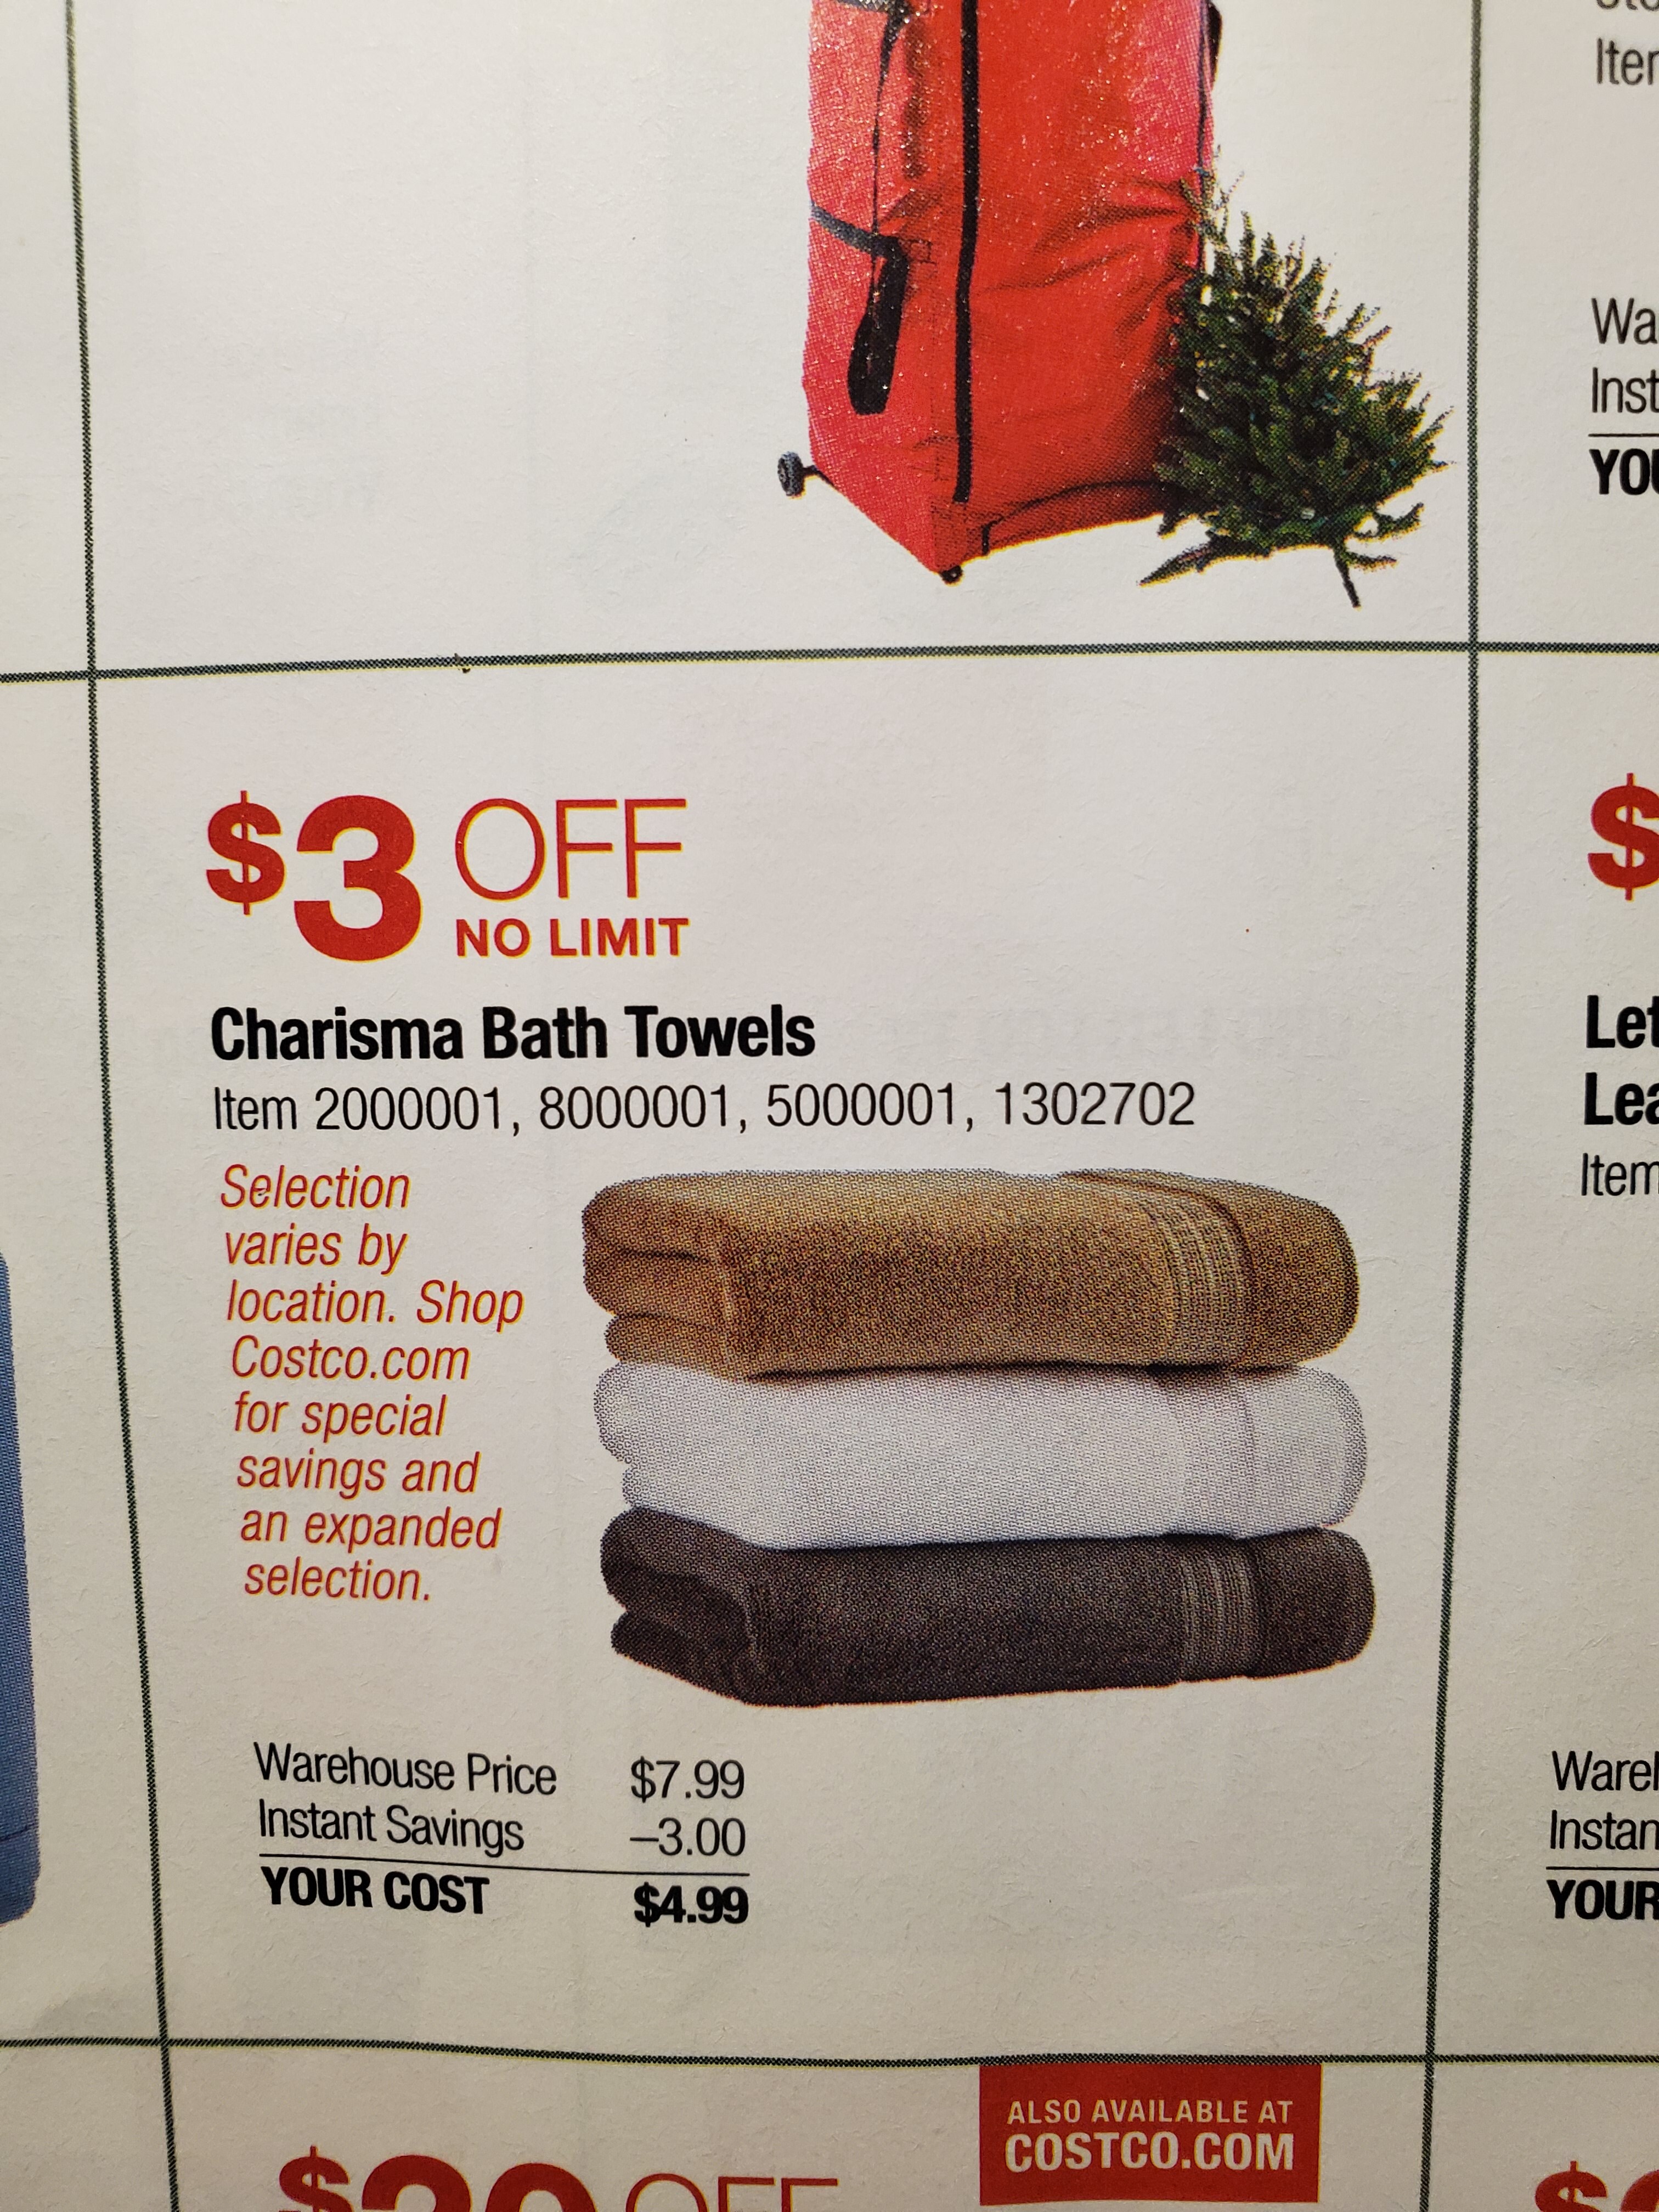 For those of you who are US Costco members and need towels